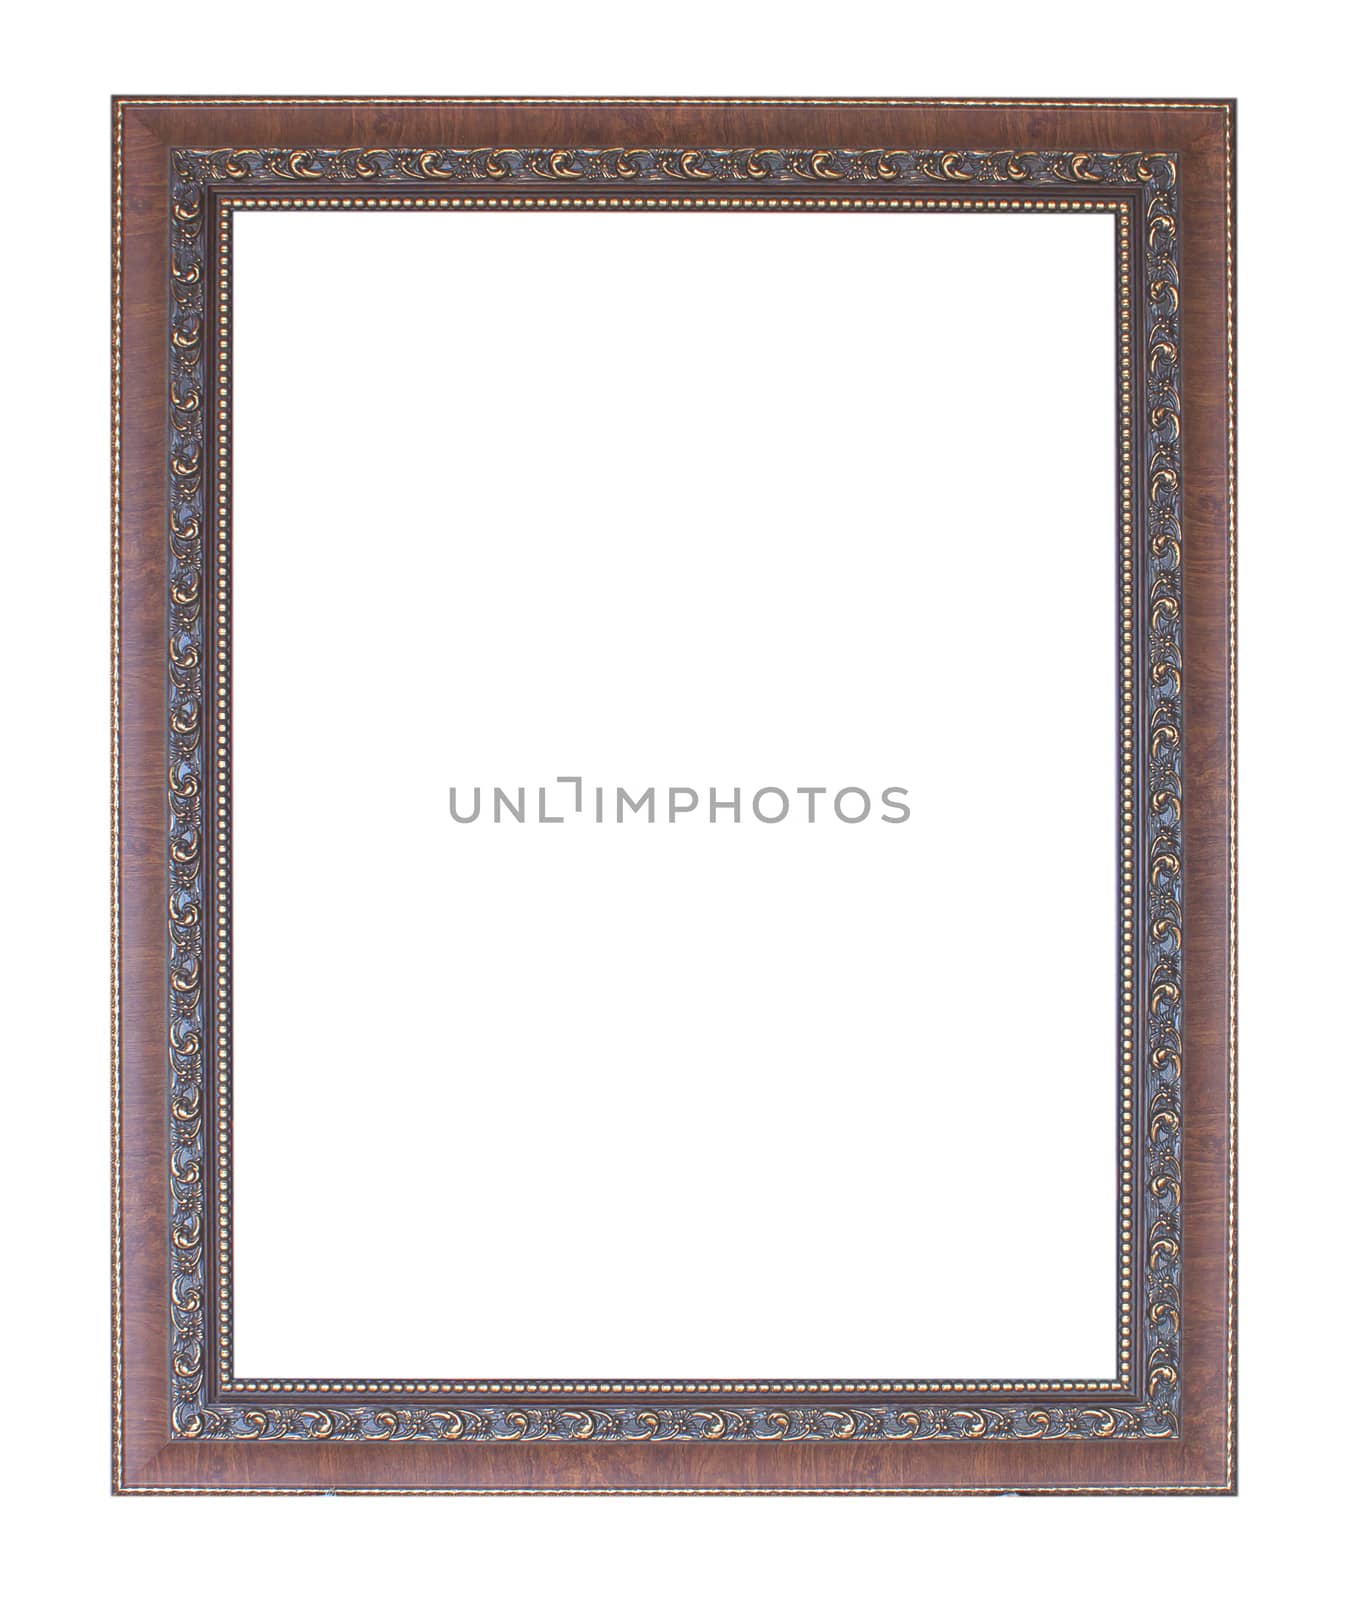 woode picture frame. Isolated over white background